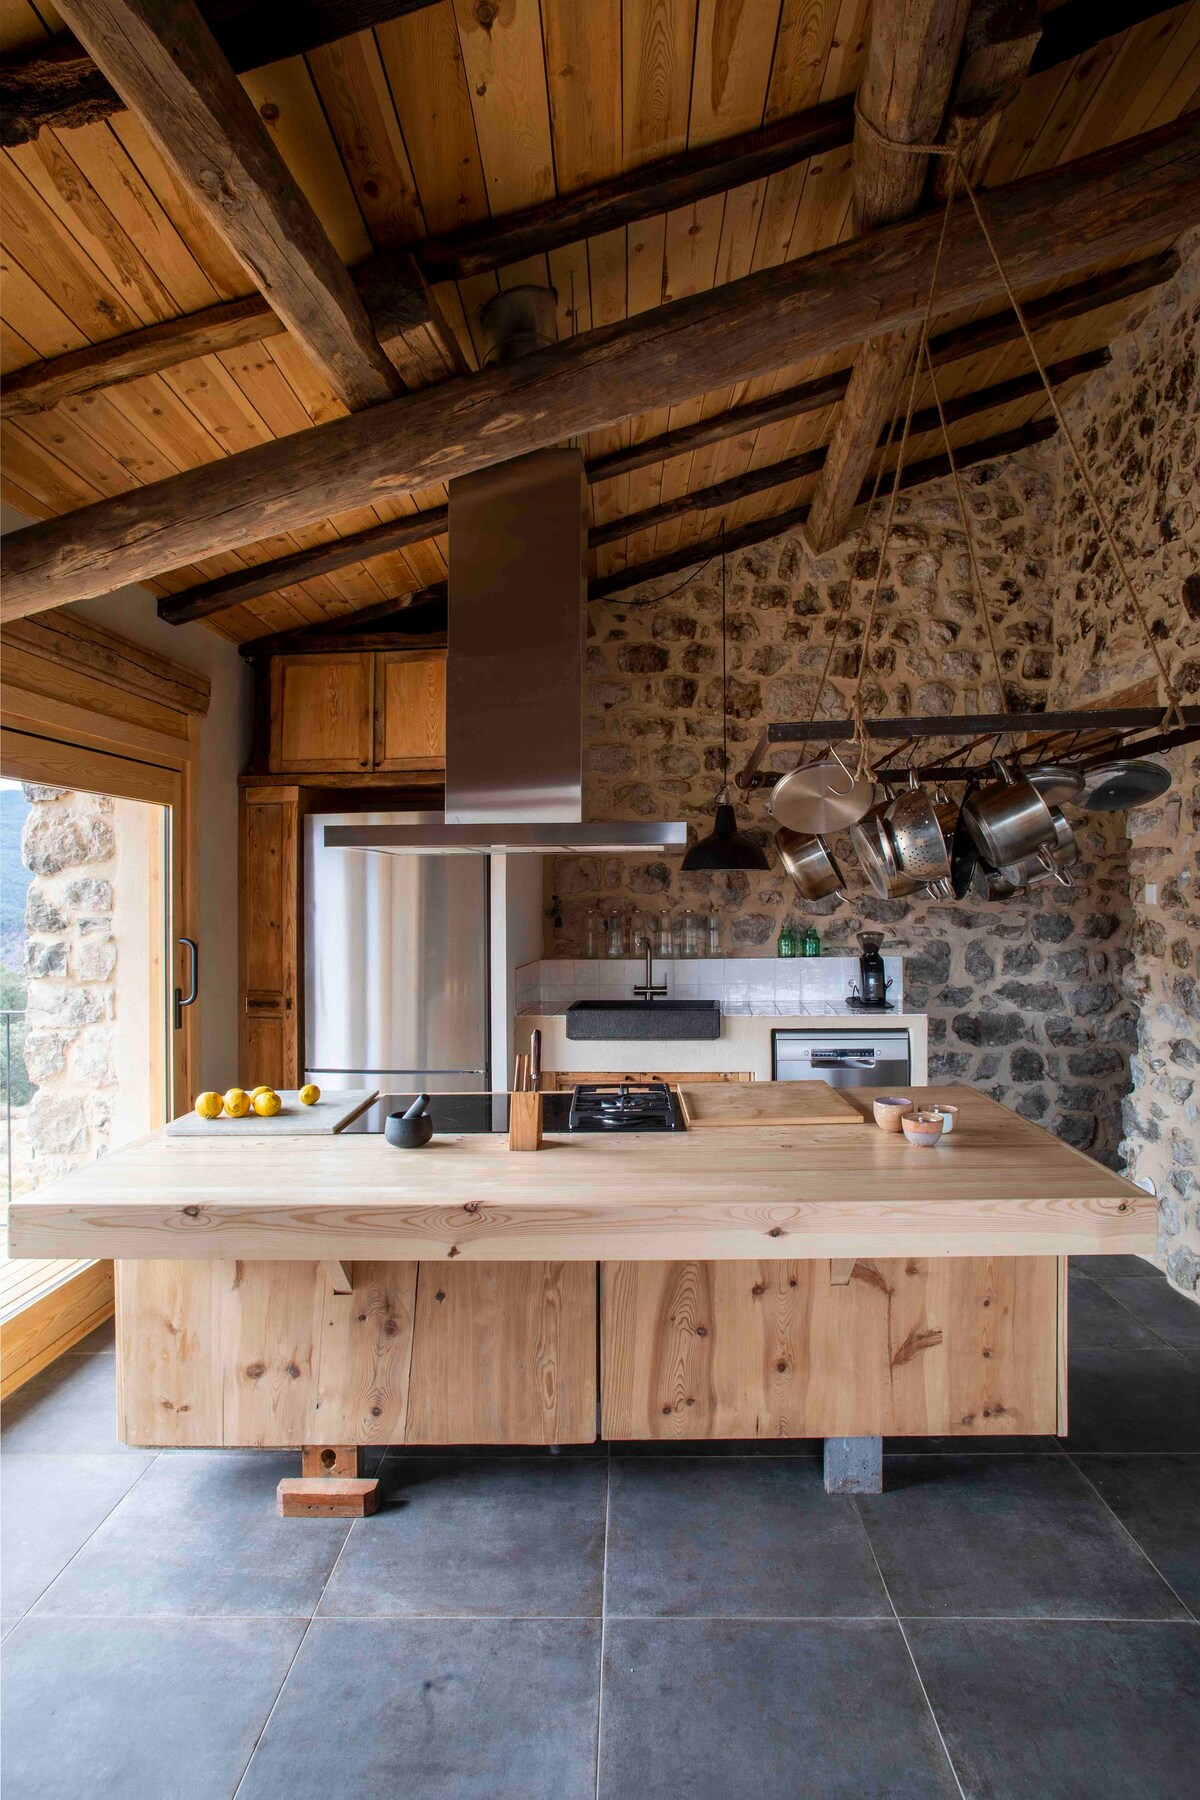 Sustainable and self-sufficient farmhouse